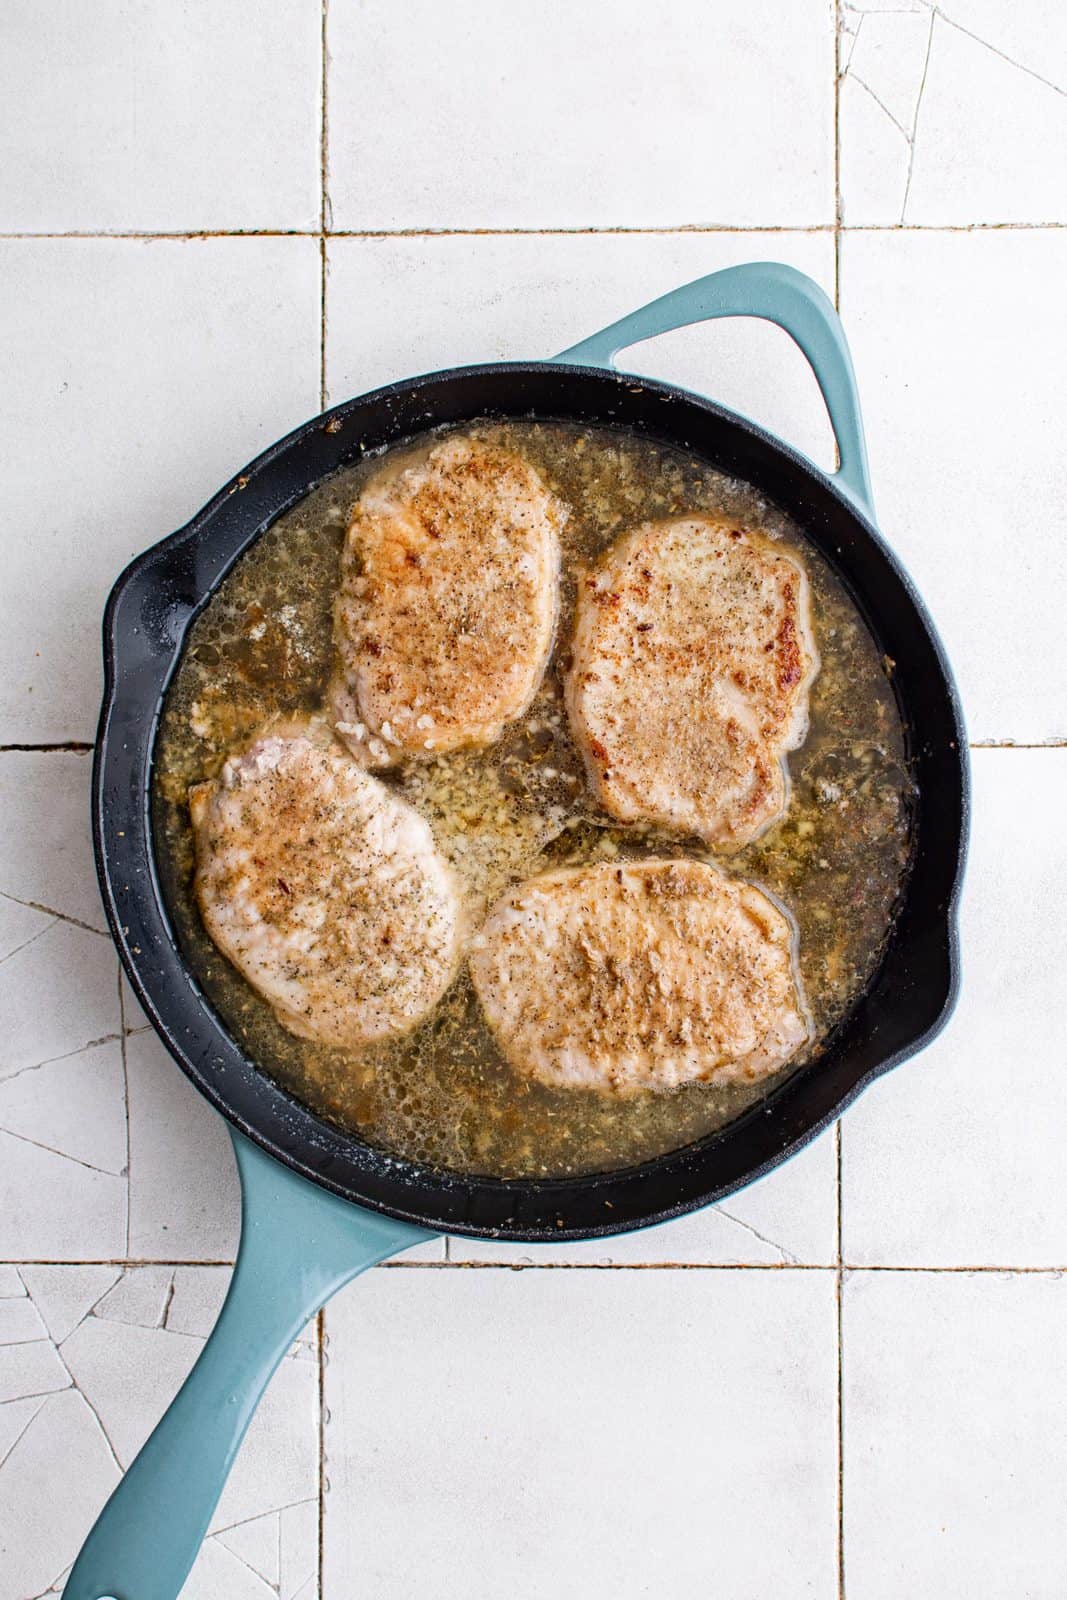 Sauce added to pork chops in pan.